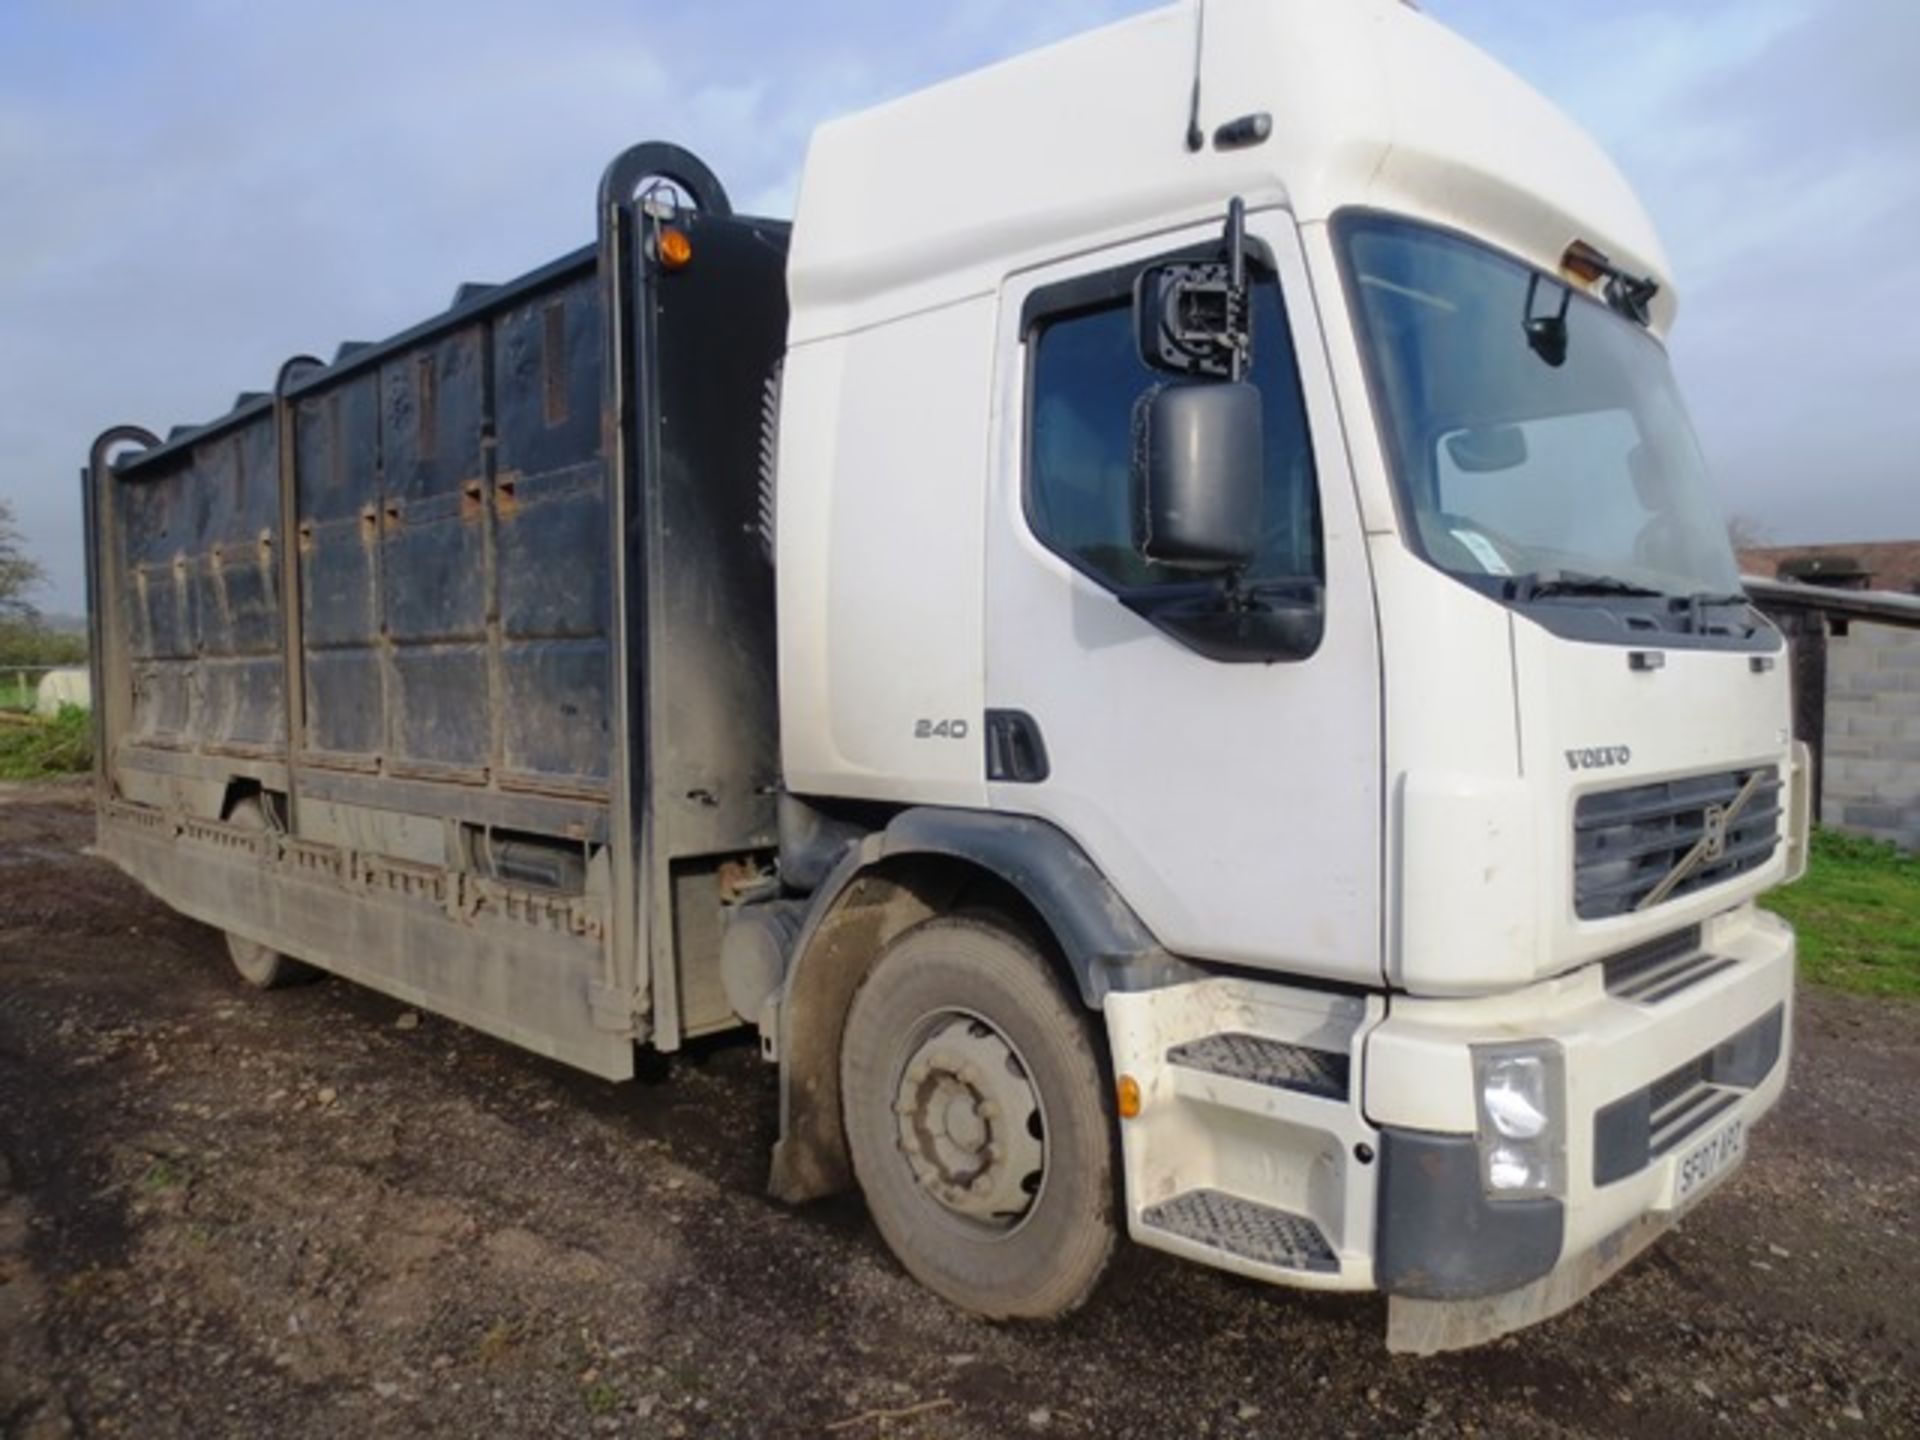 Volvo FE 240 adapted crew cab, specialist built multi stillage recycling lorry, GVW: 18,000kgs,